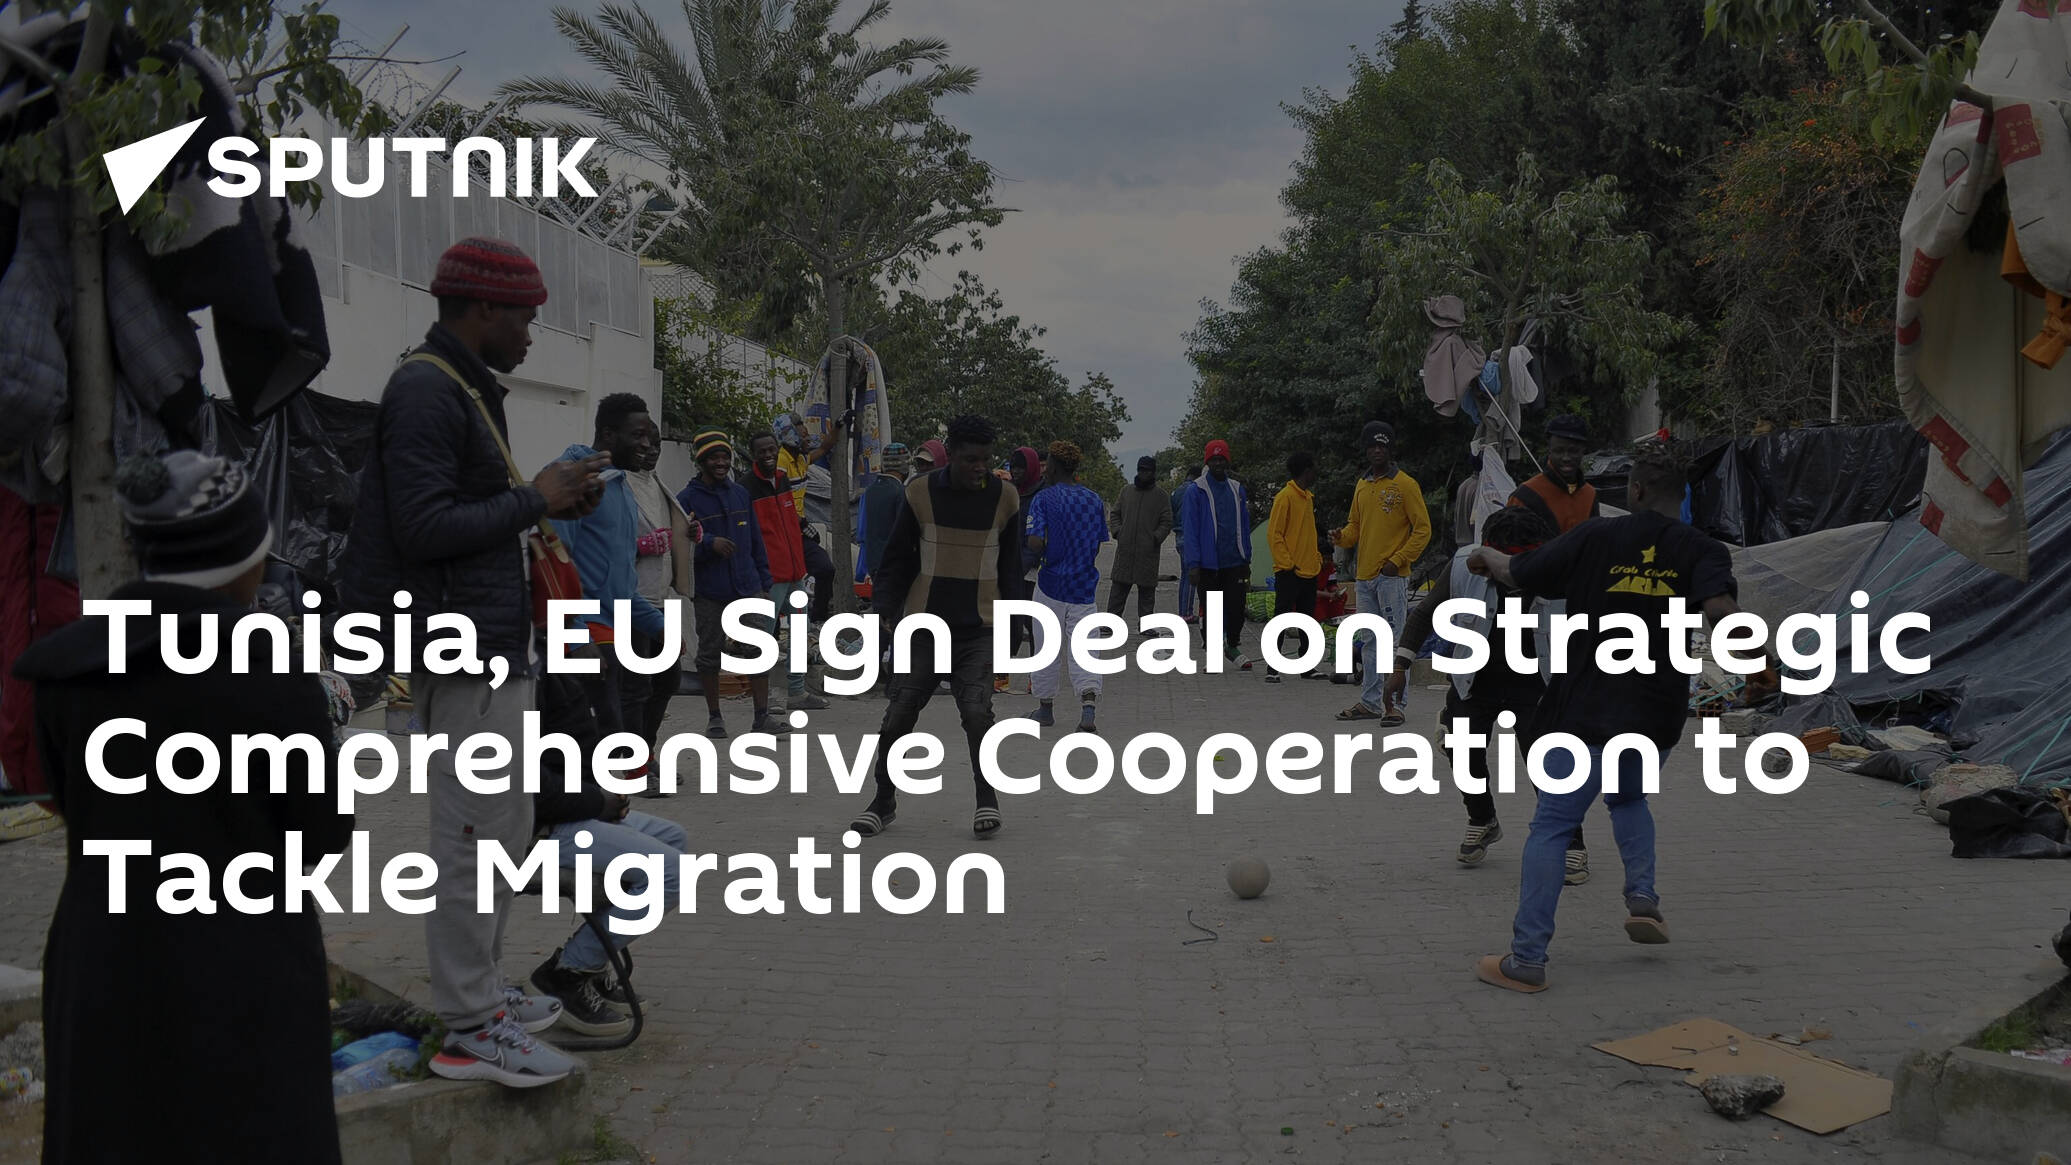 Tunisia, EU Sign Deal on Strategic Comprehensive Cooperation to Tackle Migration